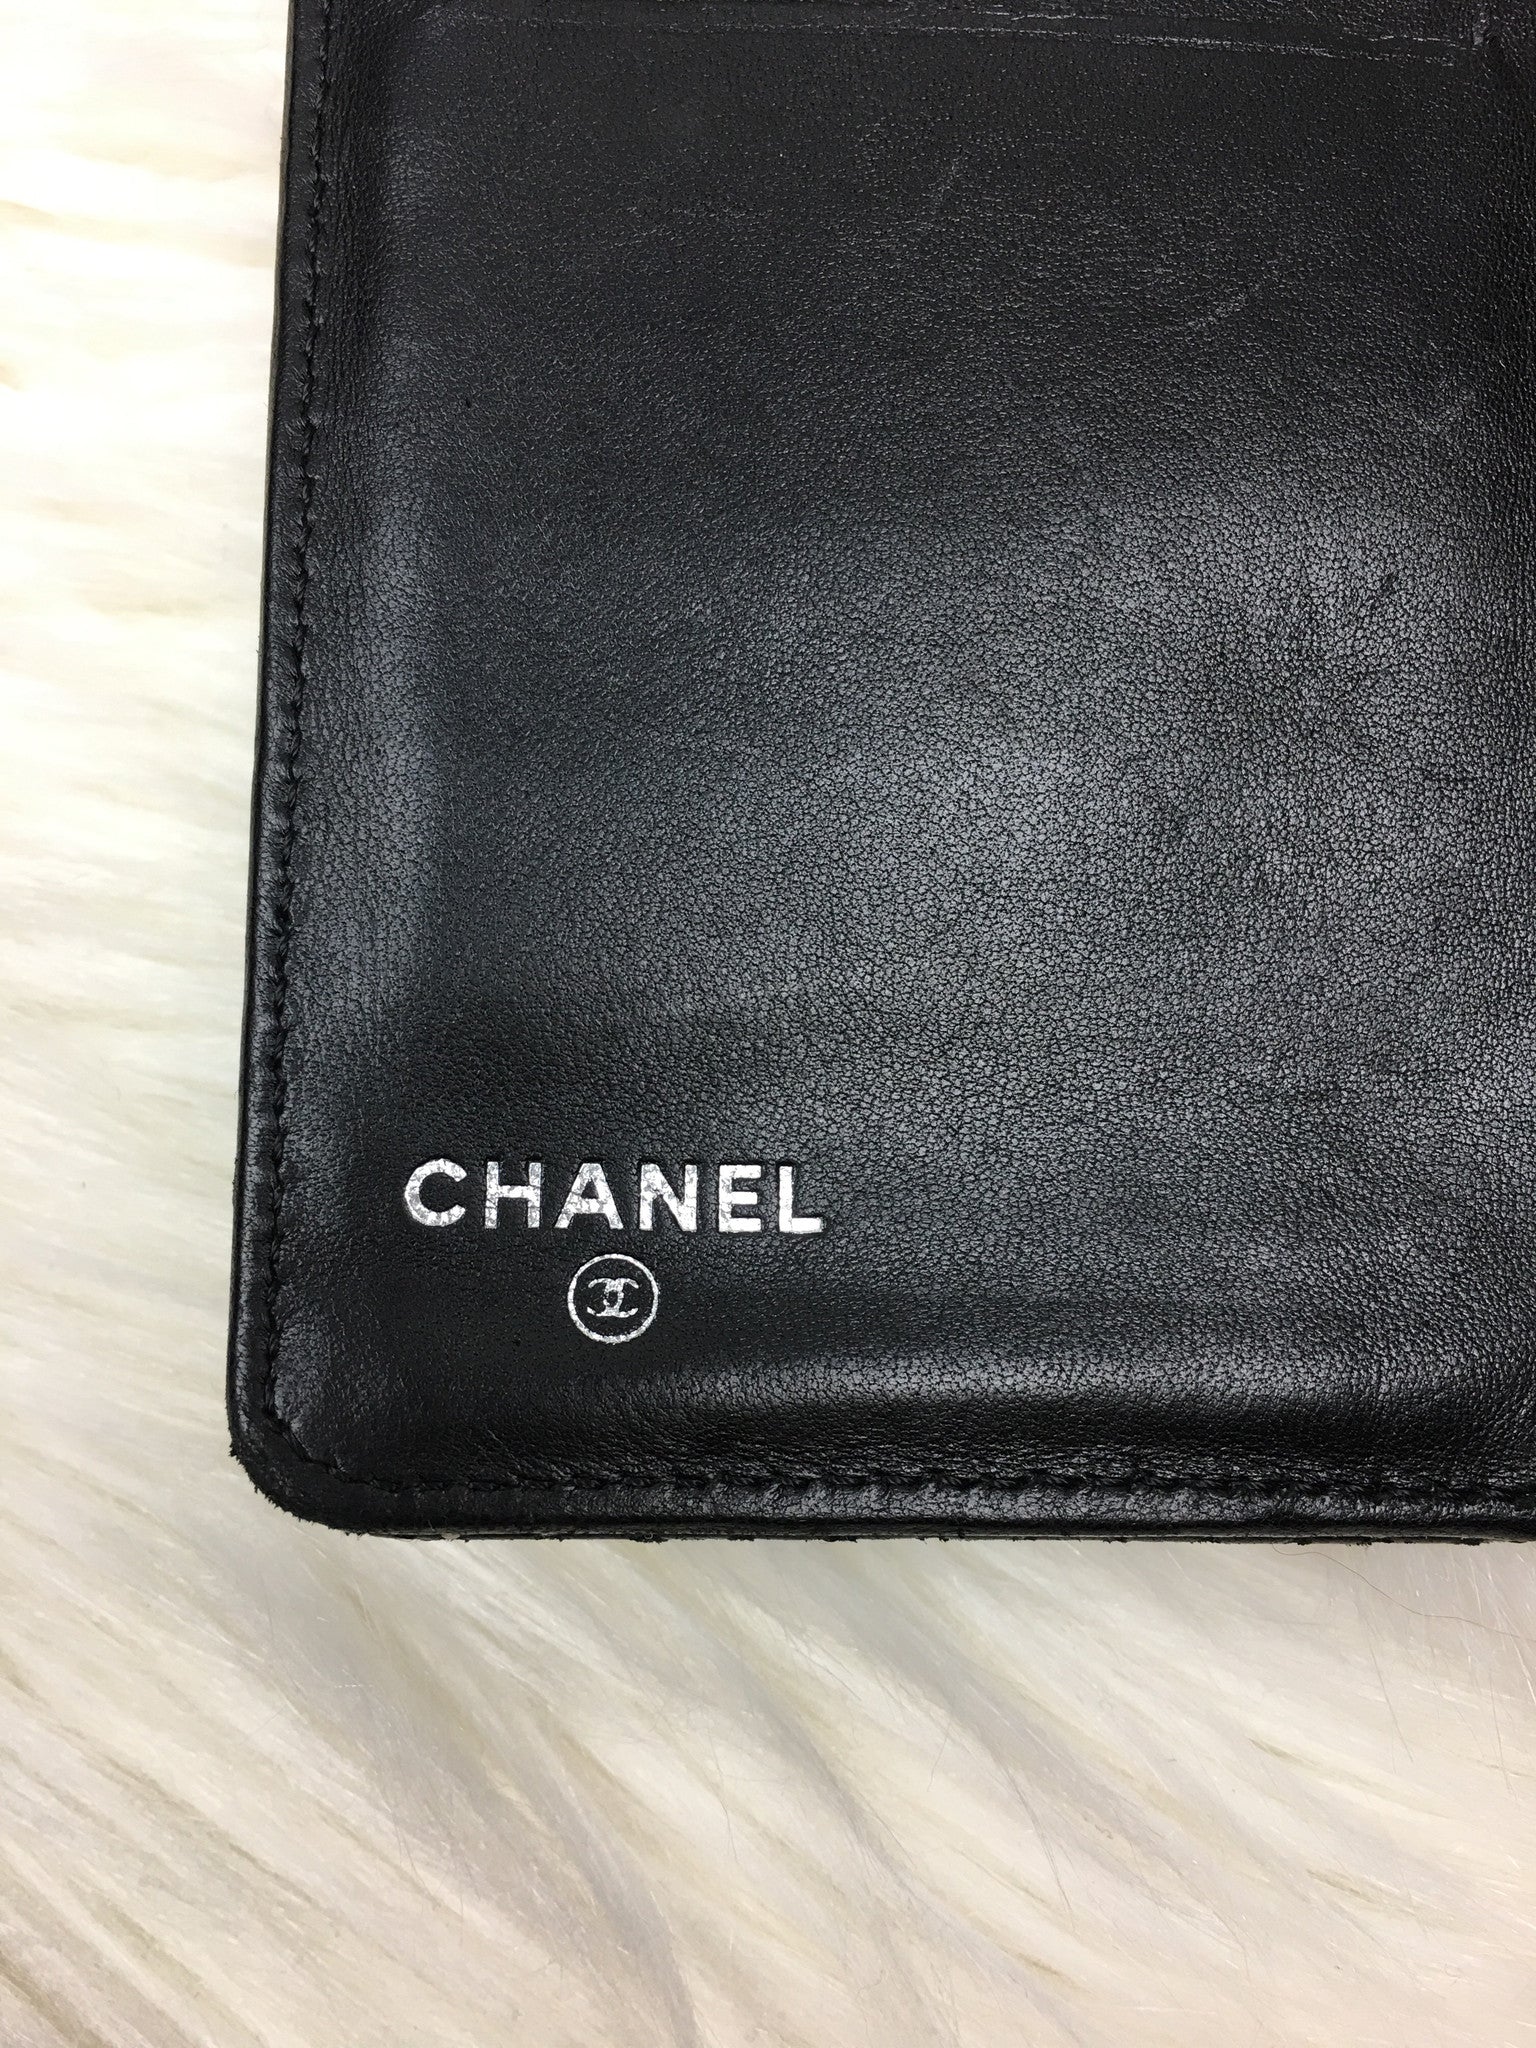 CHANEL Lambskin Perforated Black/White Wallet